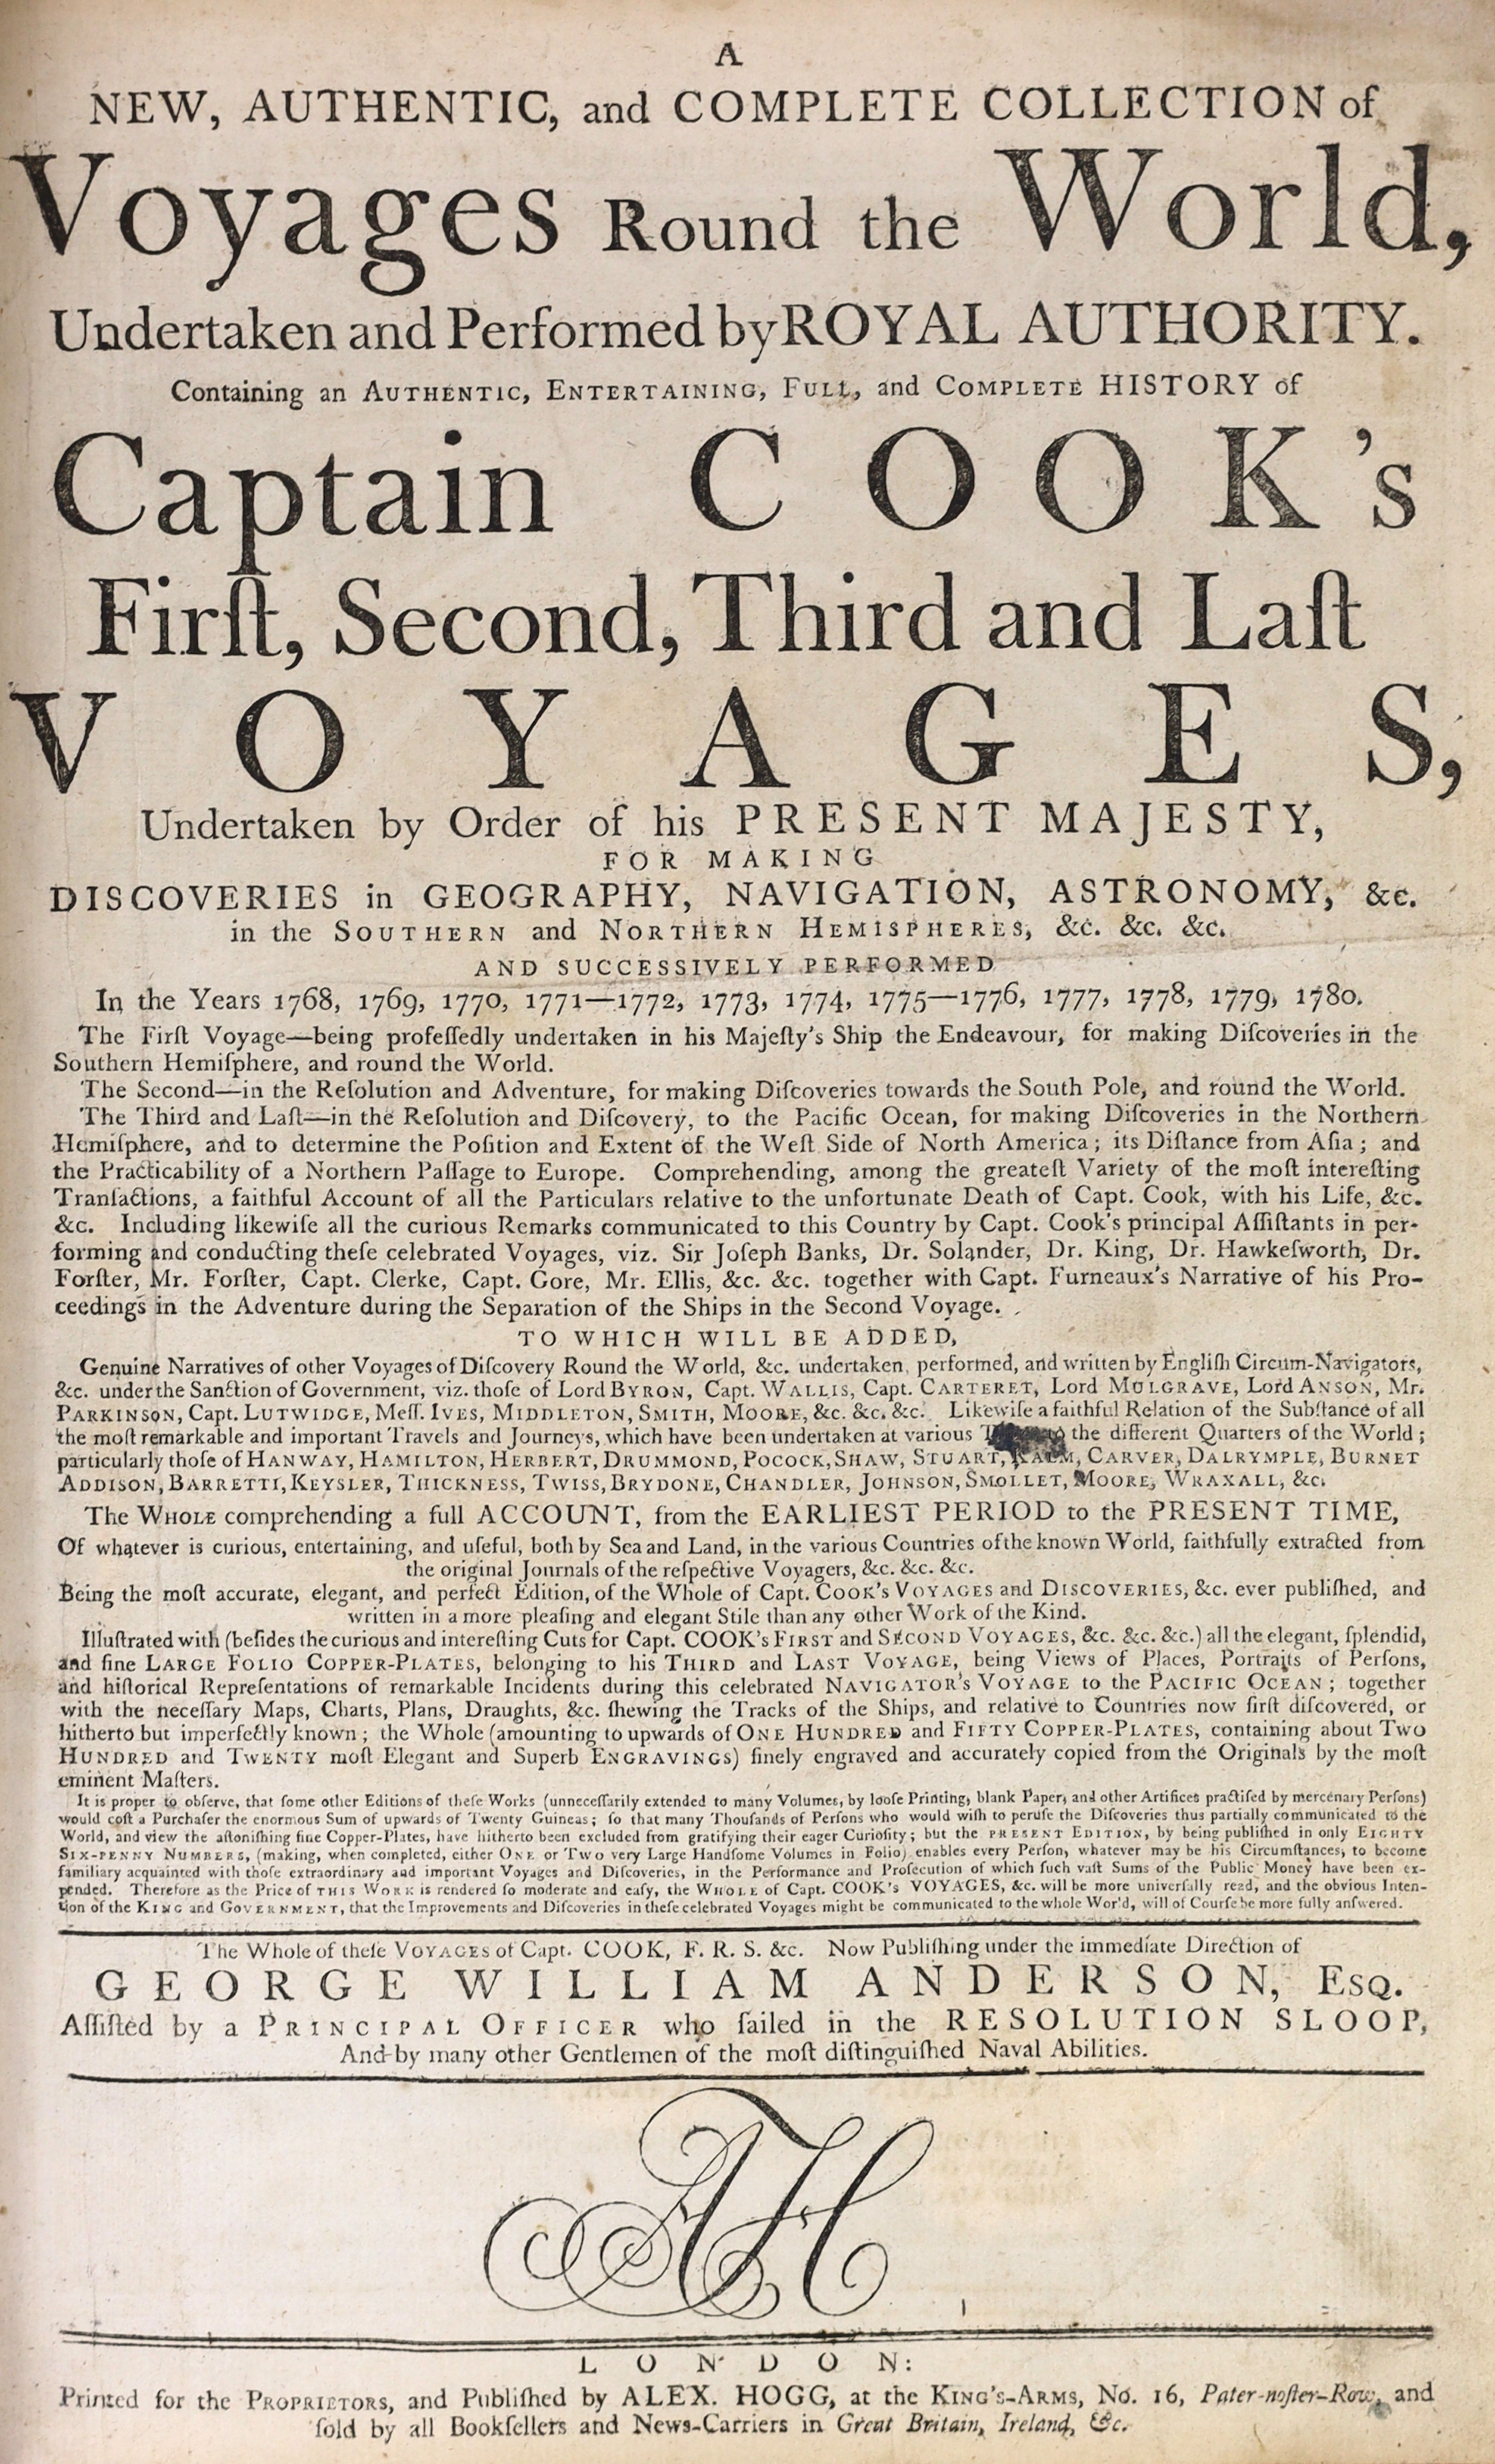 Cook, James - Anderson, George William. A New, Authentic, and Complete Collection of Voyages Round the World